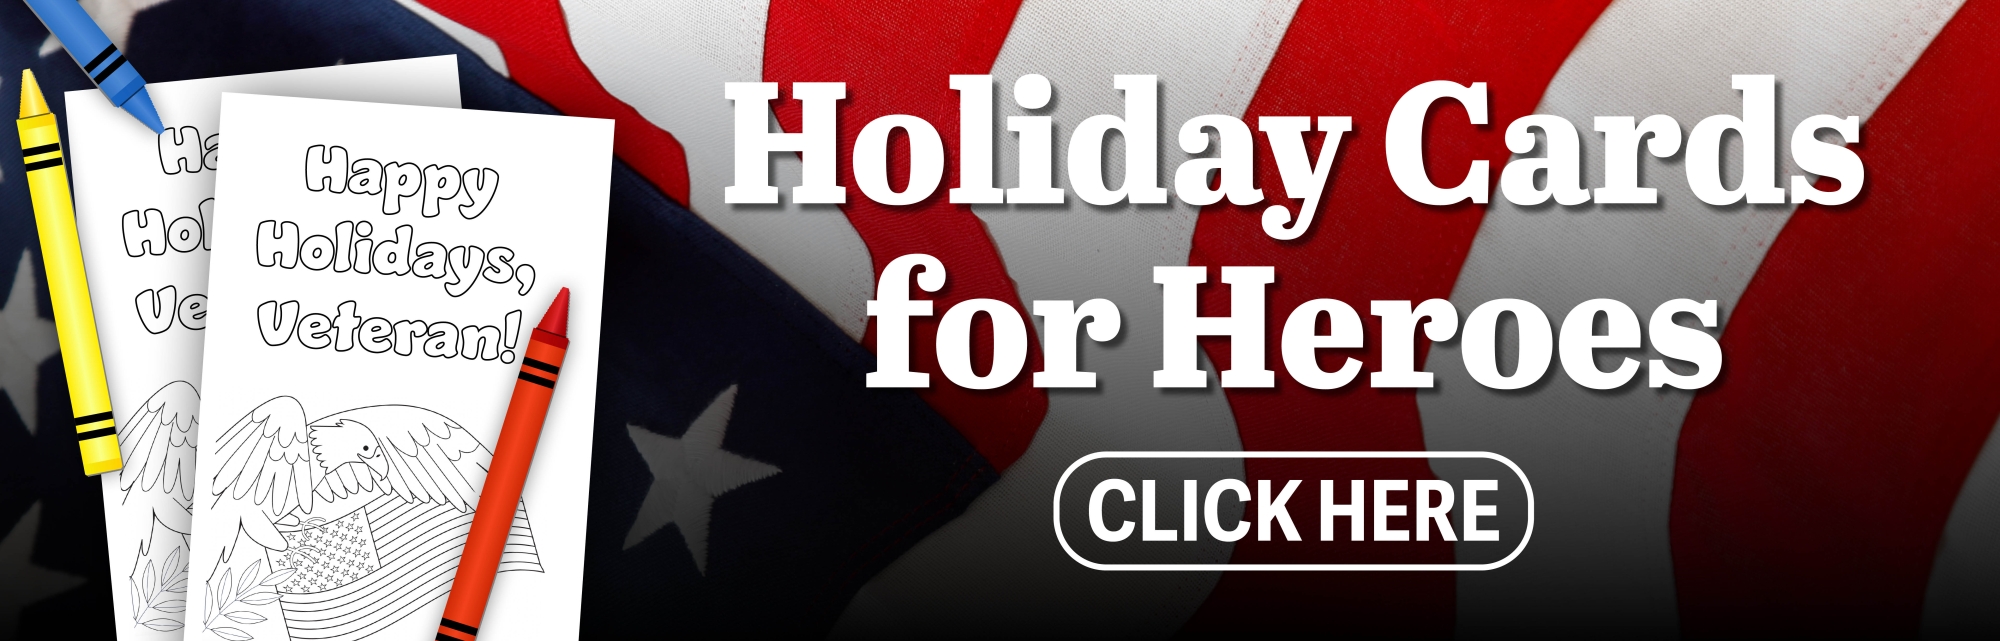 Holiday Card for Veterans